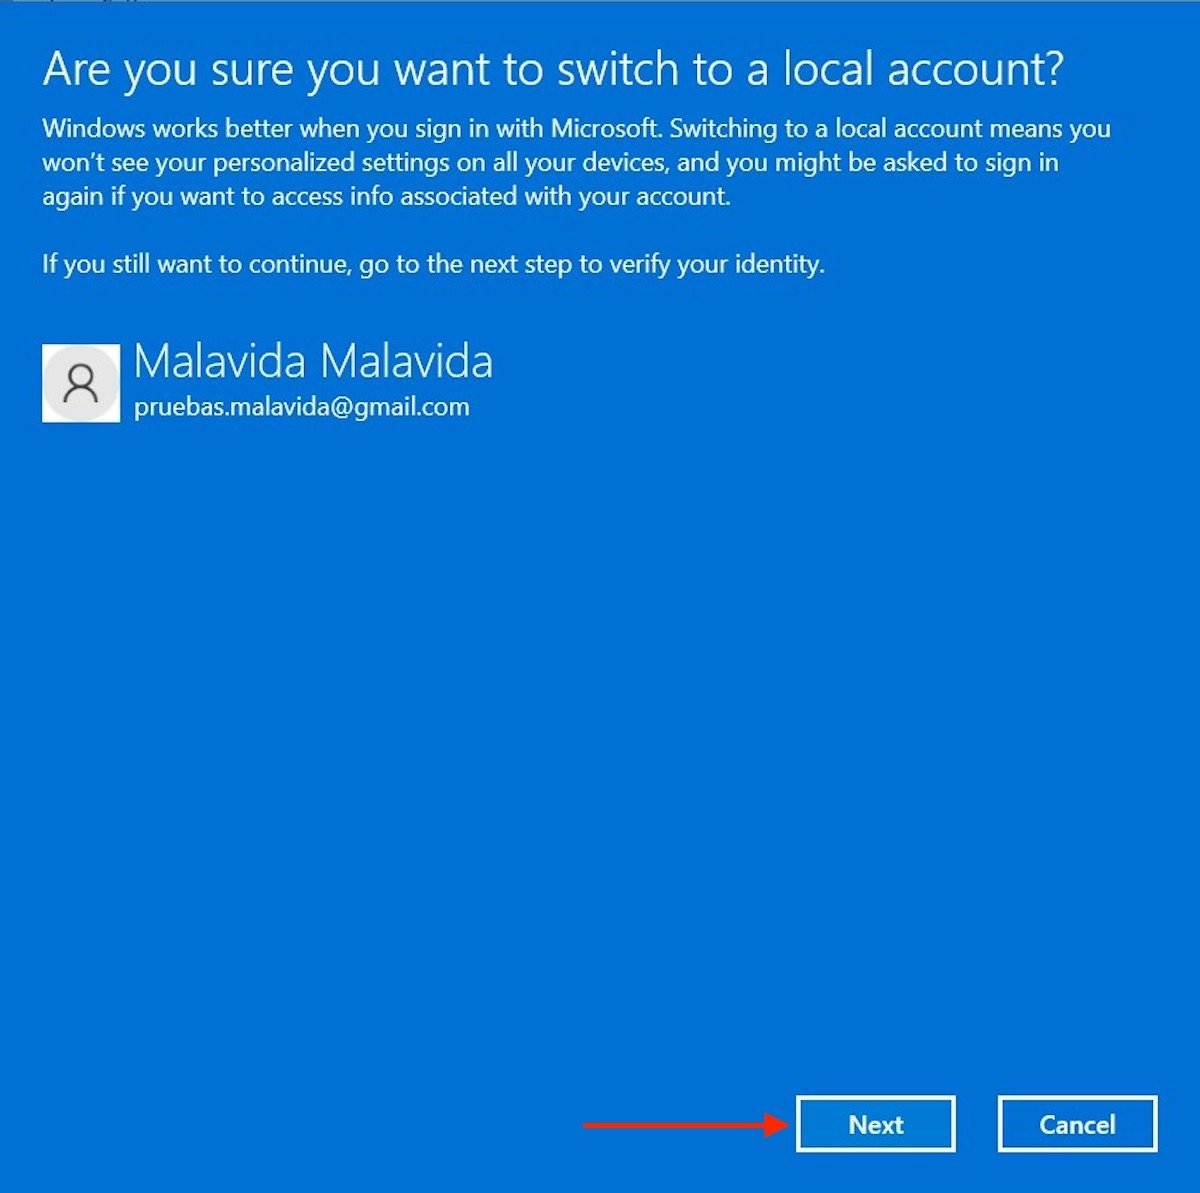 Confirm the deletion of the Microsoft account